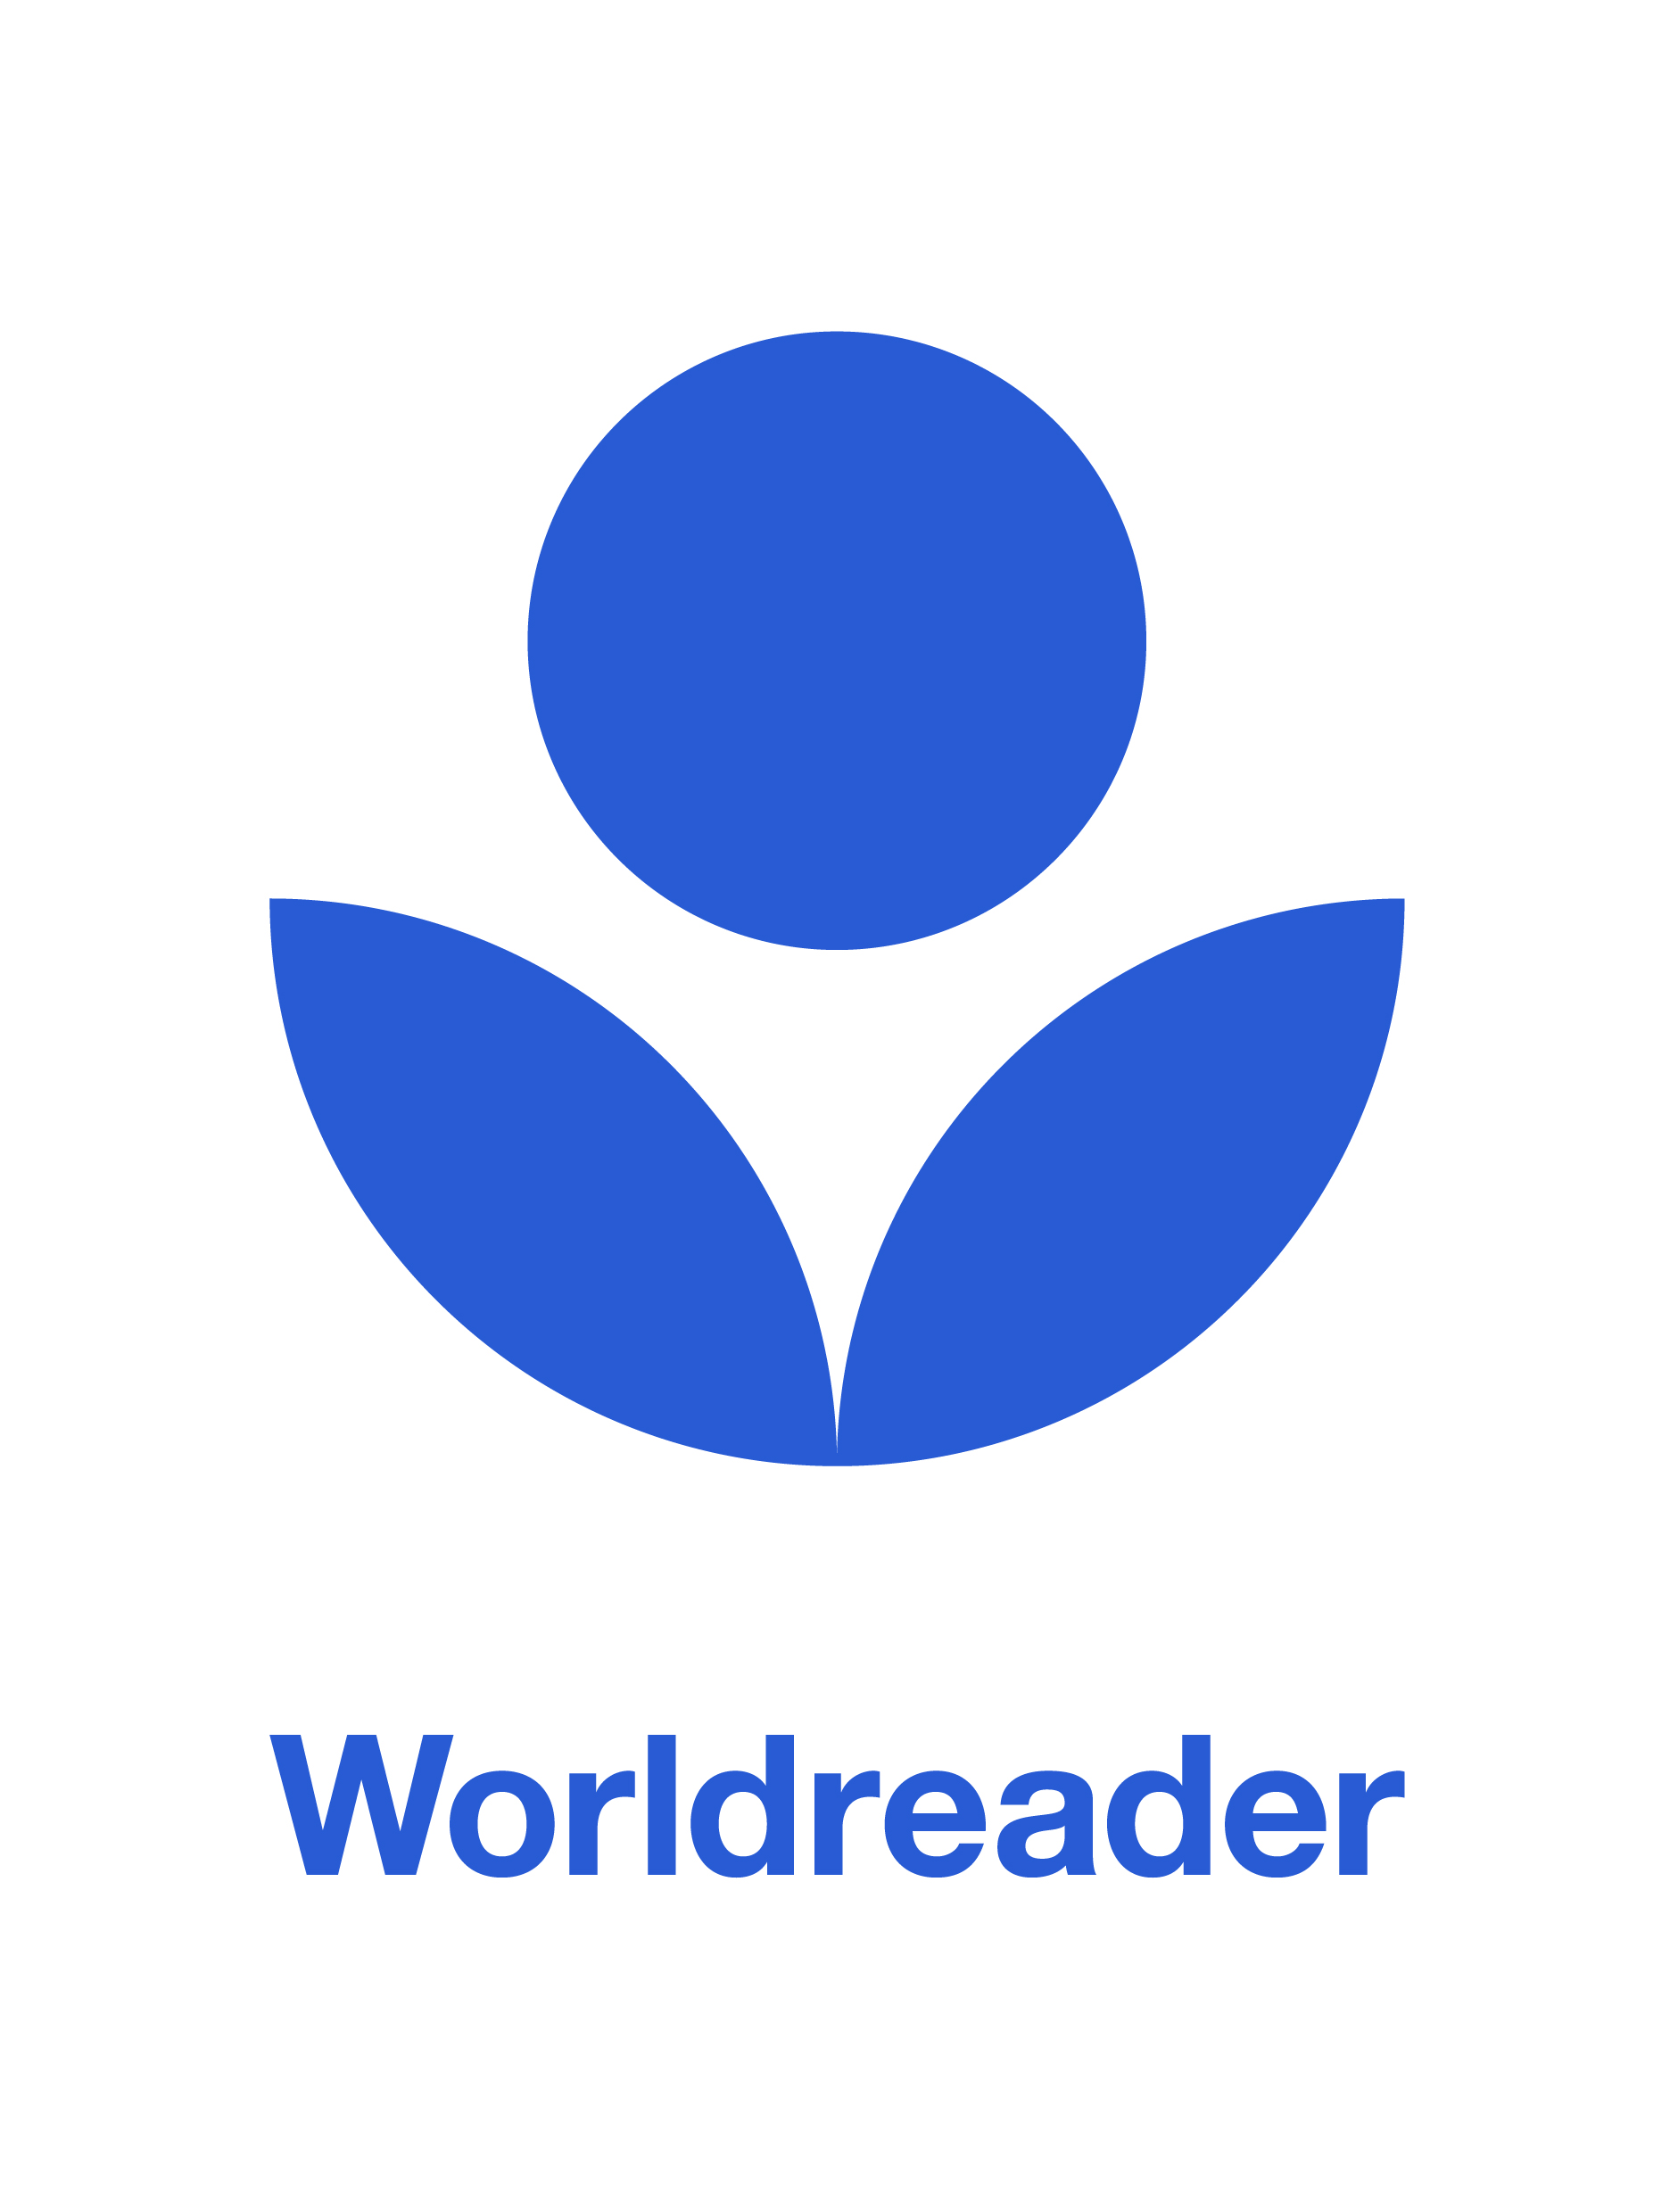 the Worldreader logo an icon type image of someone reading a book